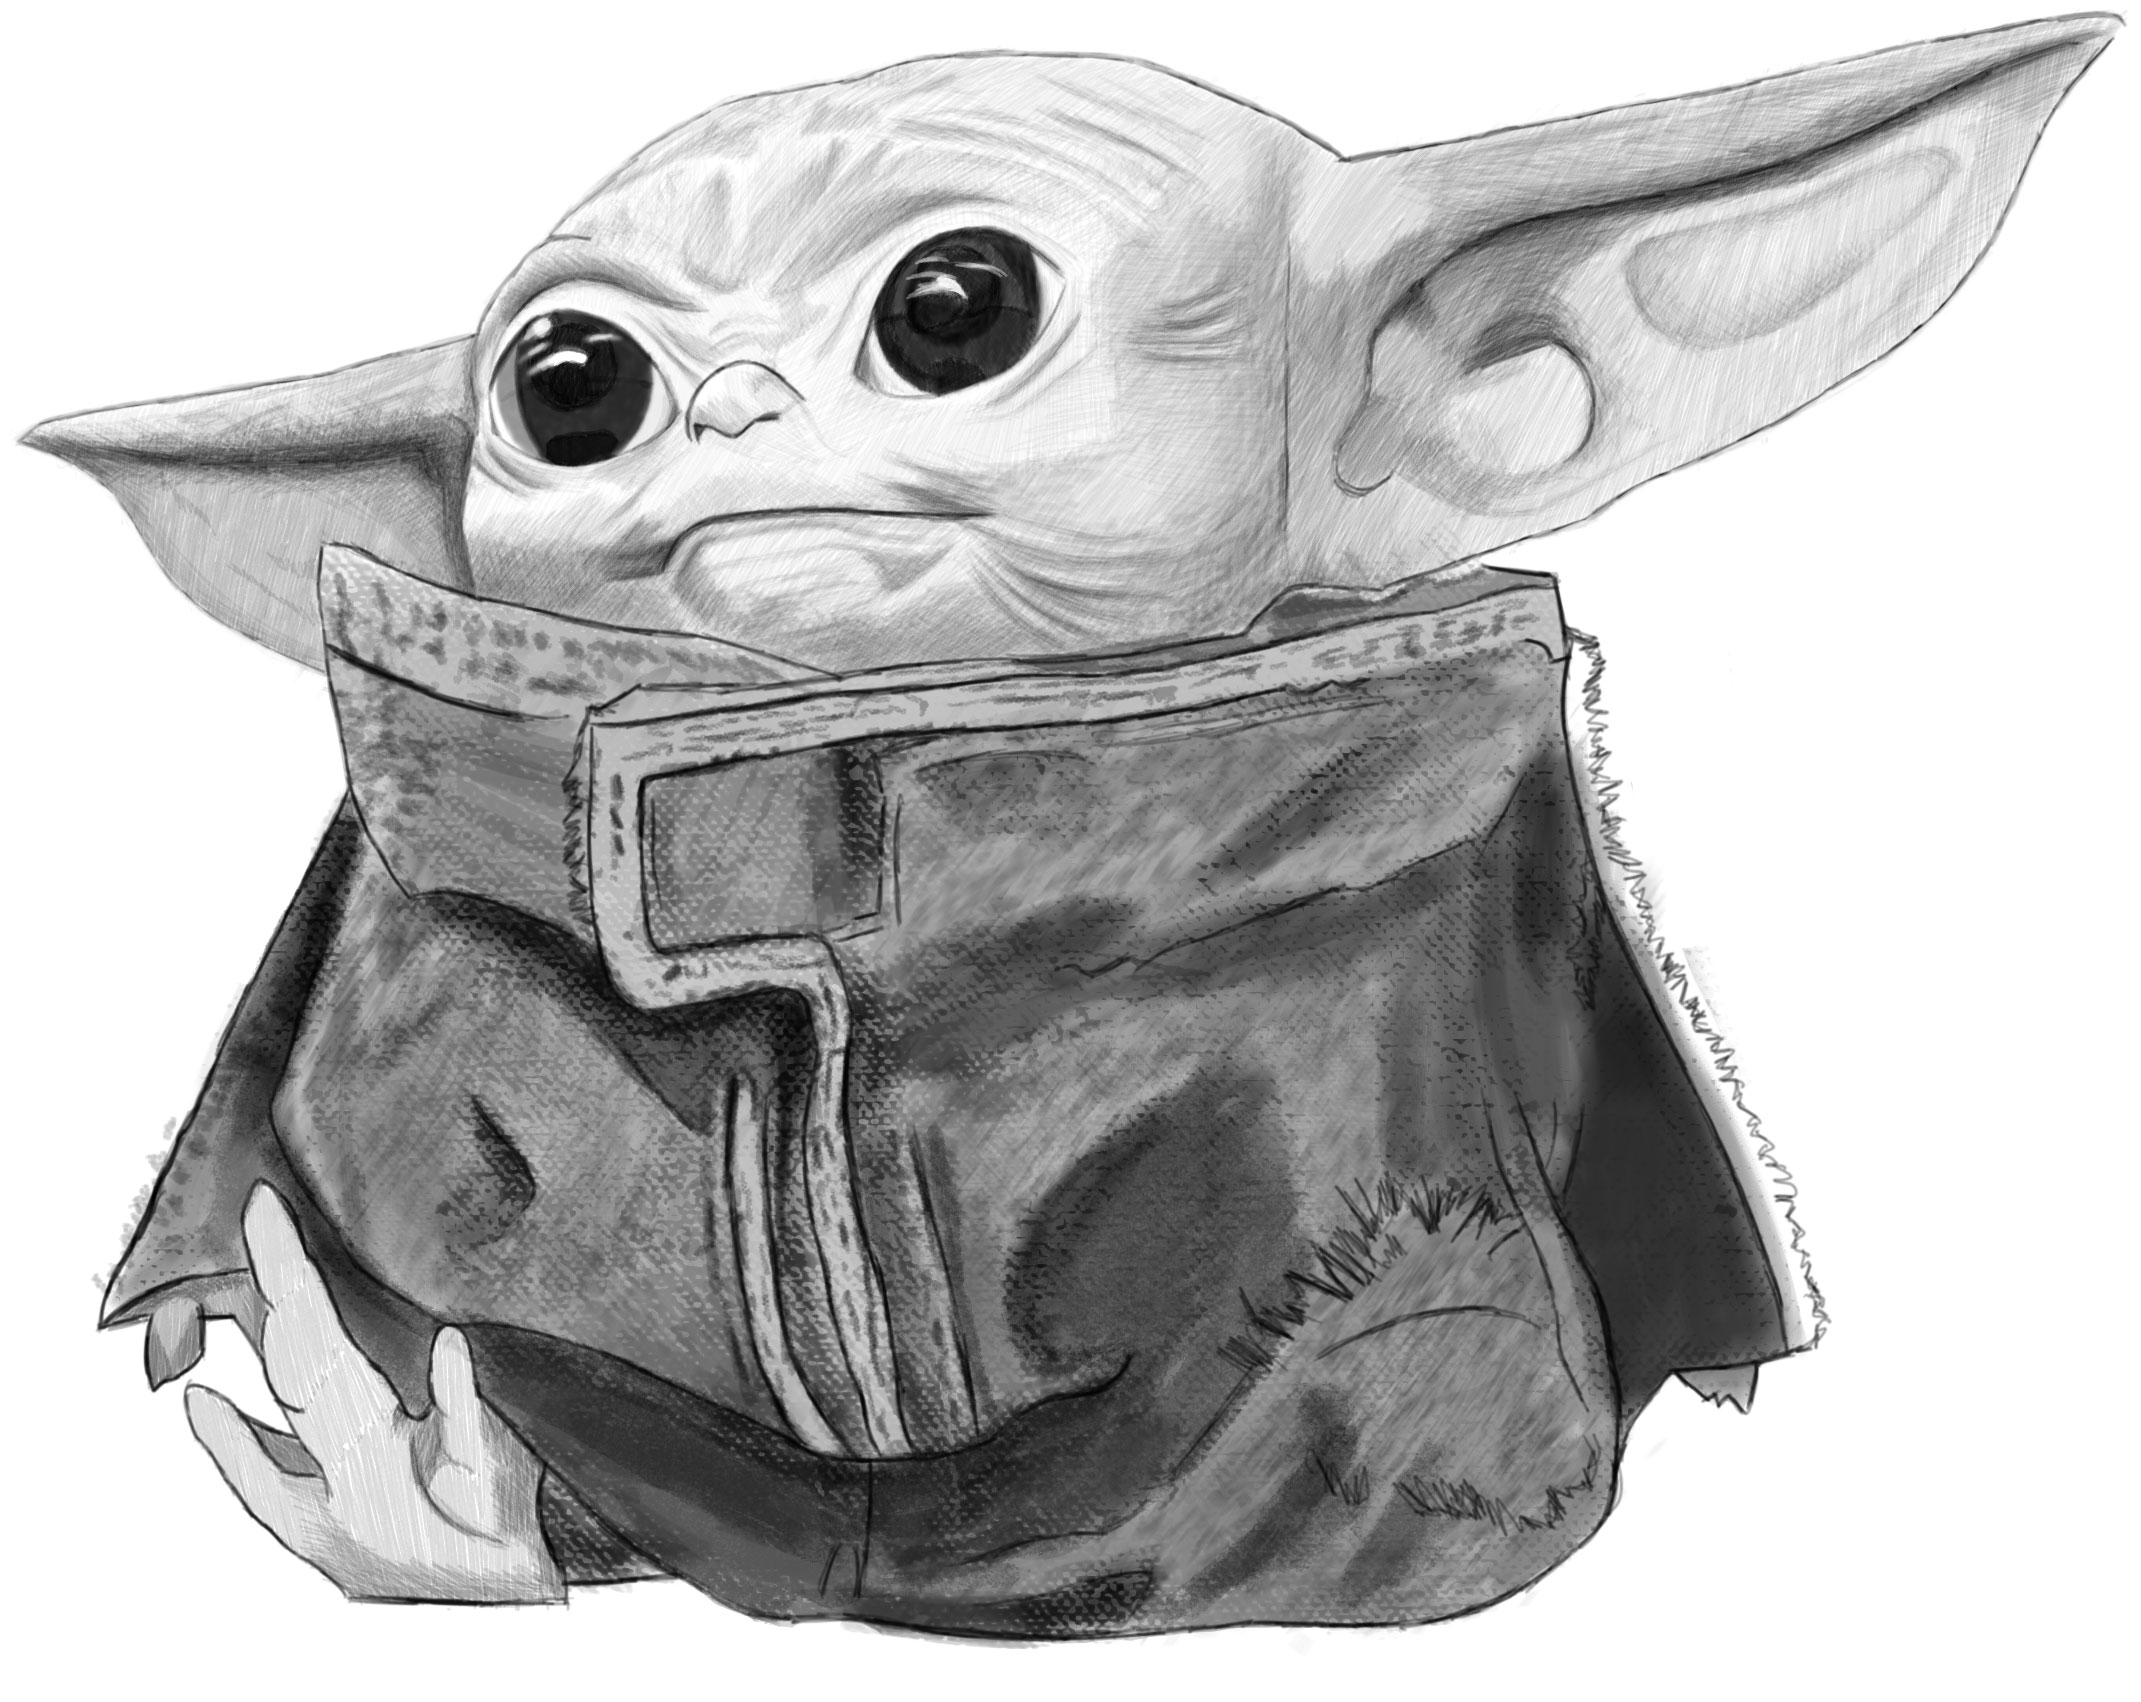 How To Draw Baby Yoda From The Mandalorian Realistic Easy Step By Step Drawing Tutorial How To Draw Step By Step Drawing Tutorials